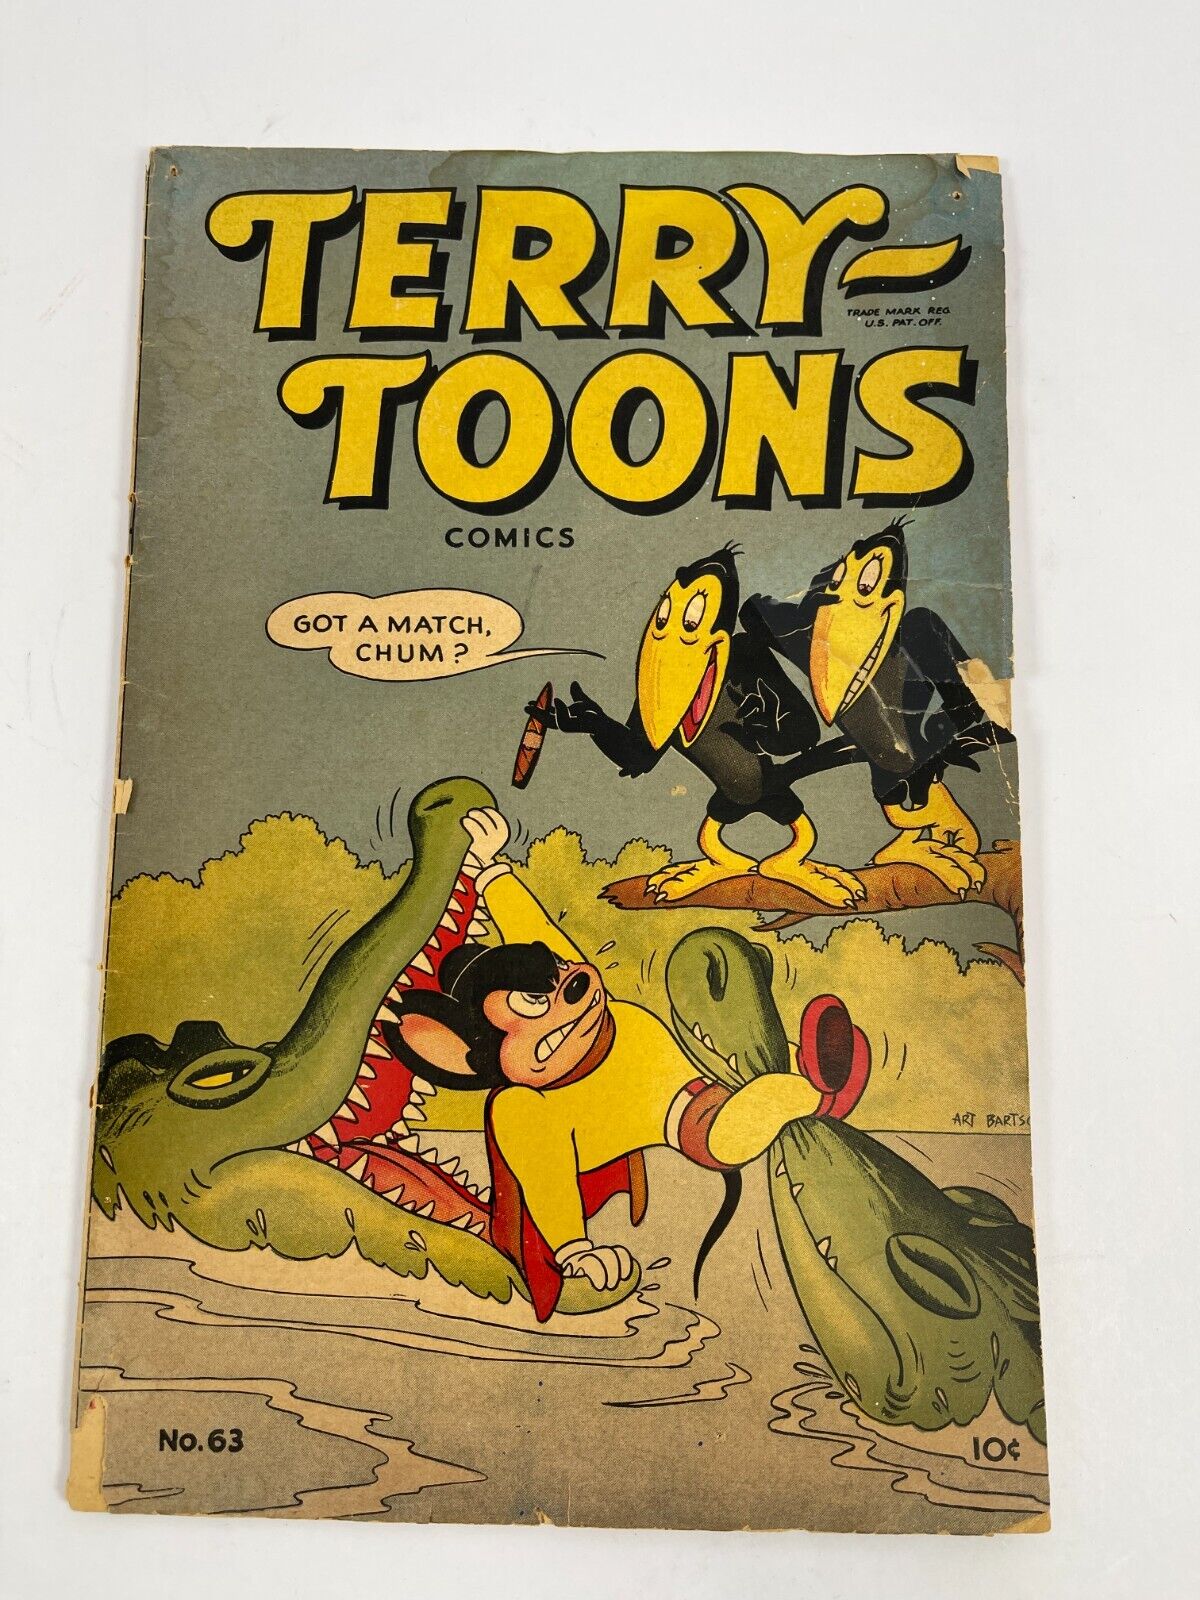 Terry-Toons #63 1947-St John-Mighty Mouse Comic Book